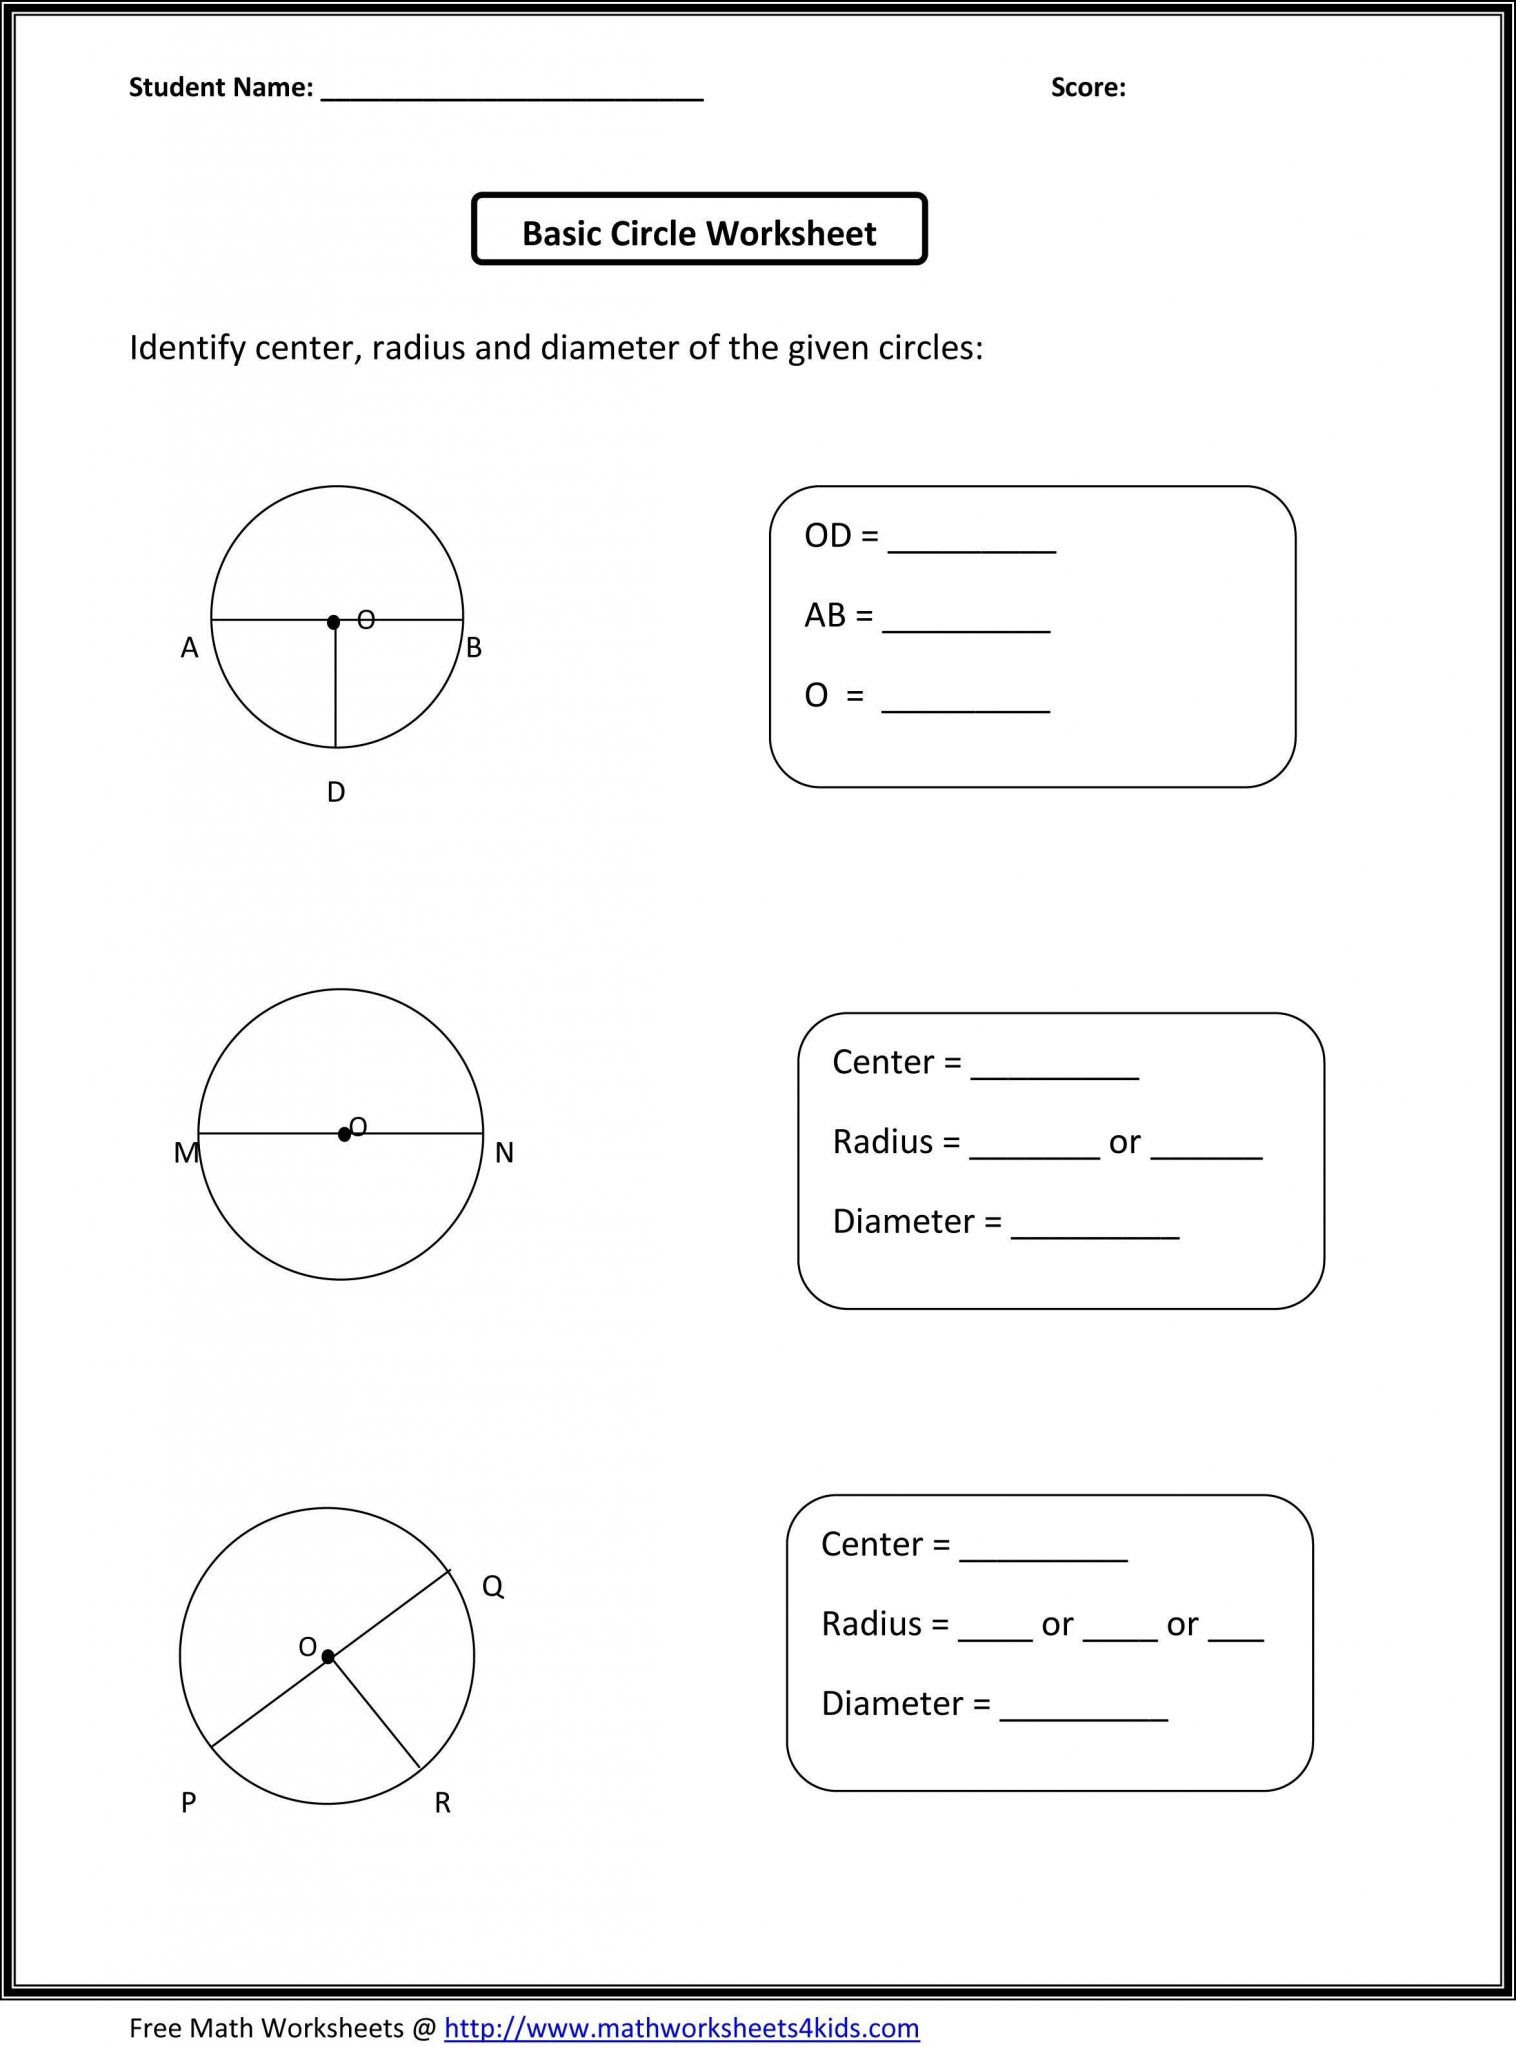 triangle-inequality-worksheet-with-answers-db-excel